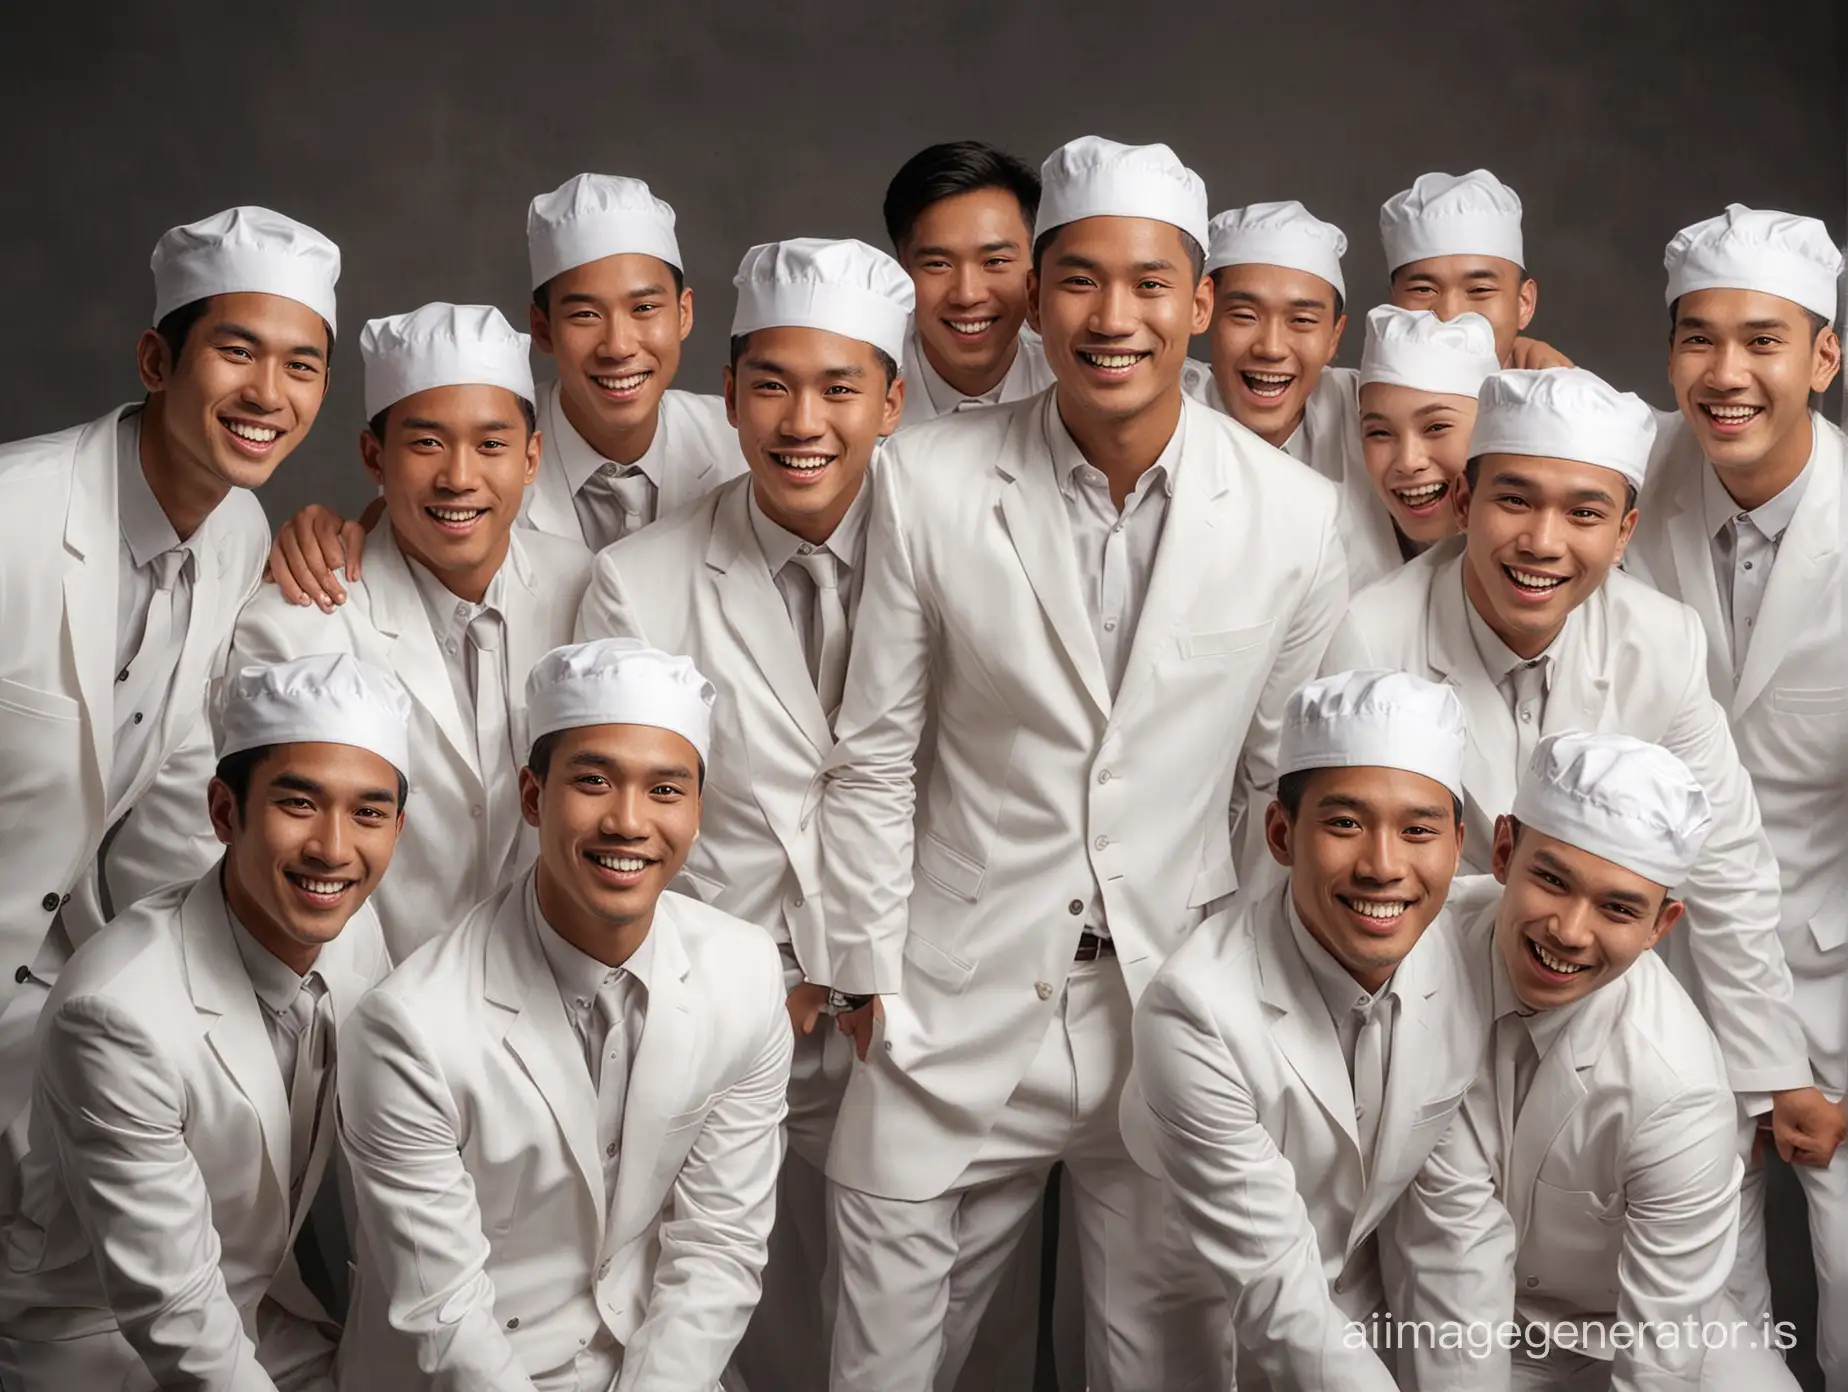 Group-Portrait-of-Joyful-Southeast-Asian-Men-in-White-Suits-and-Swimming-Caps